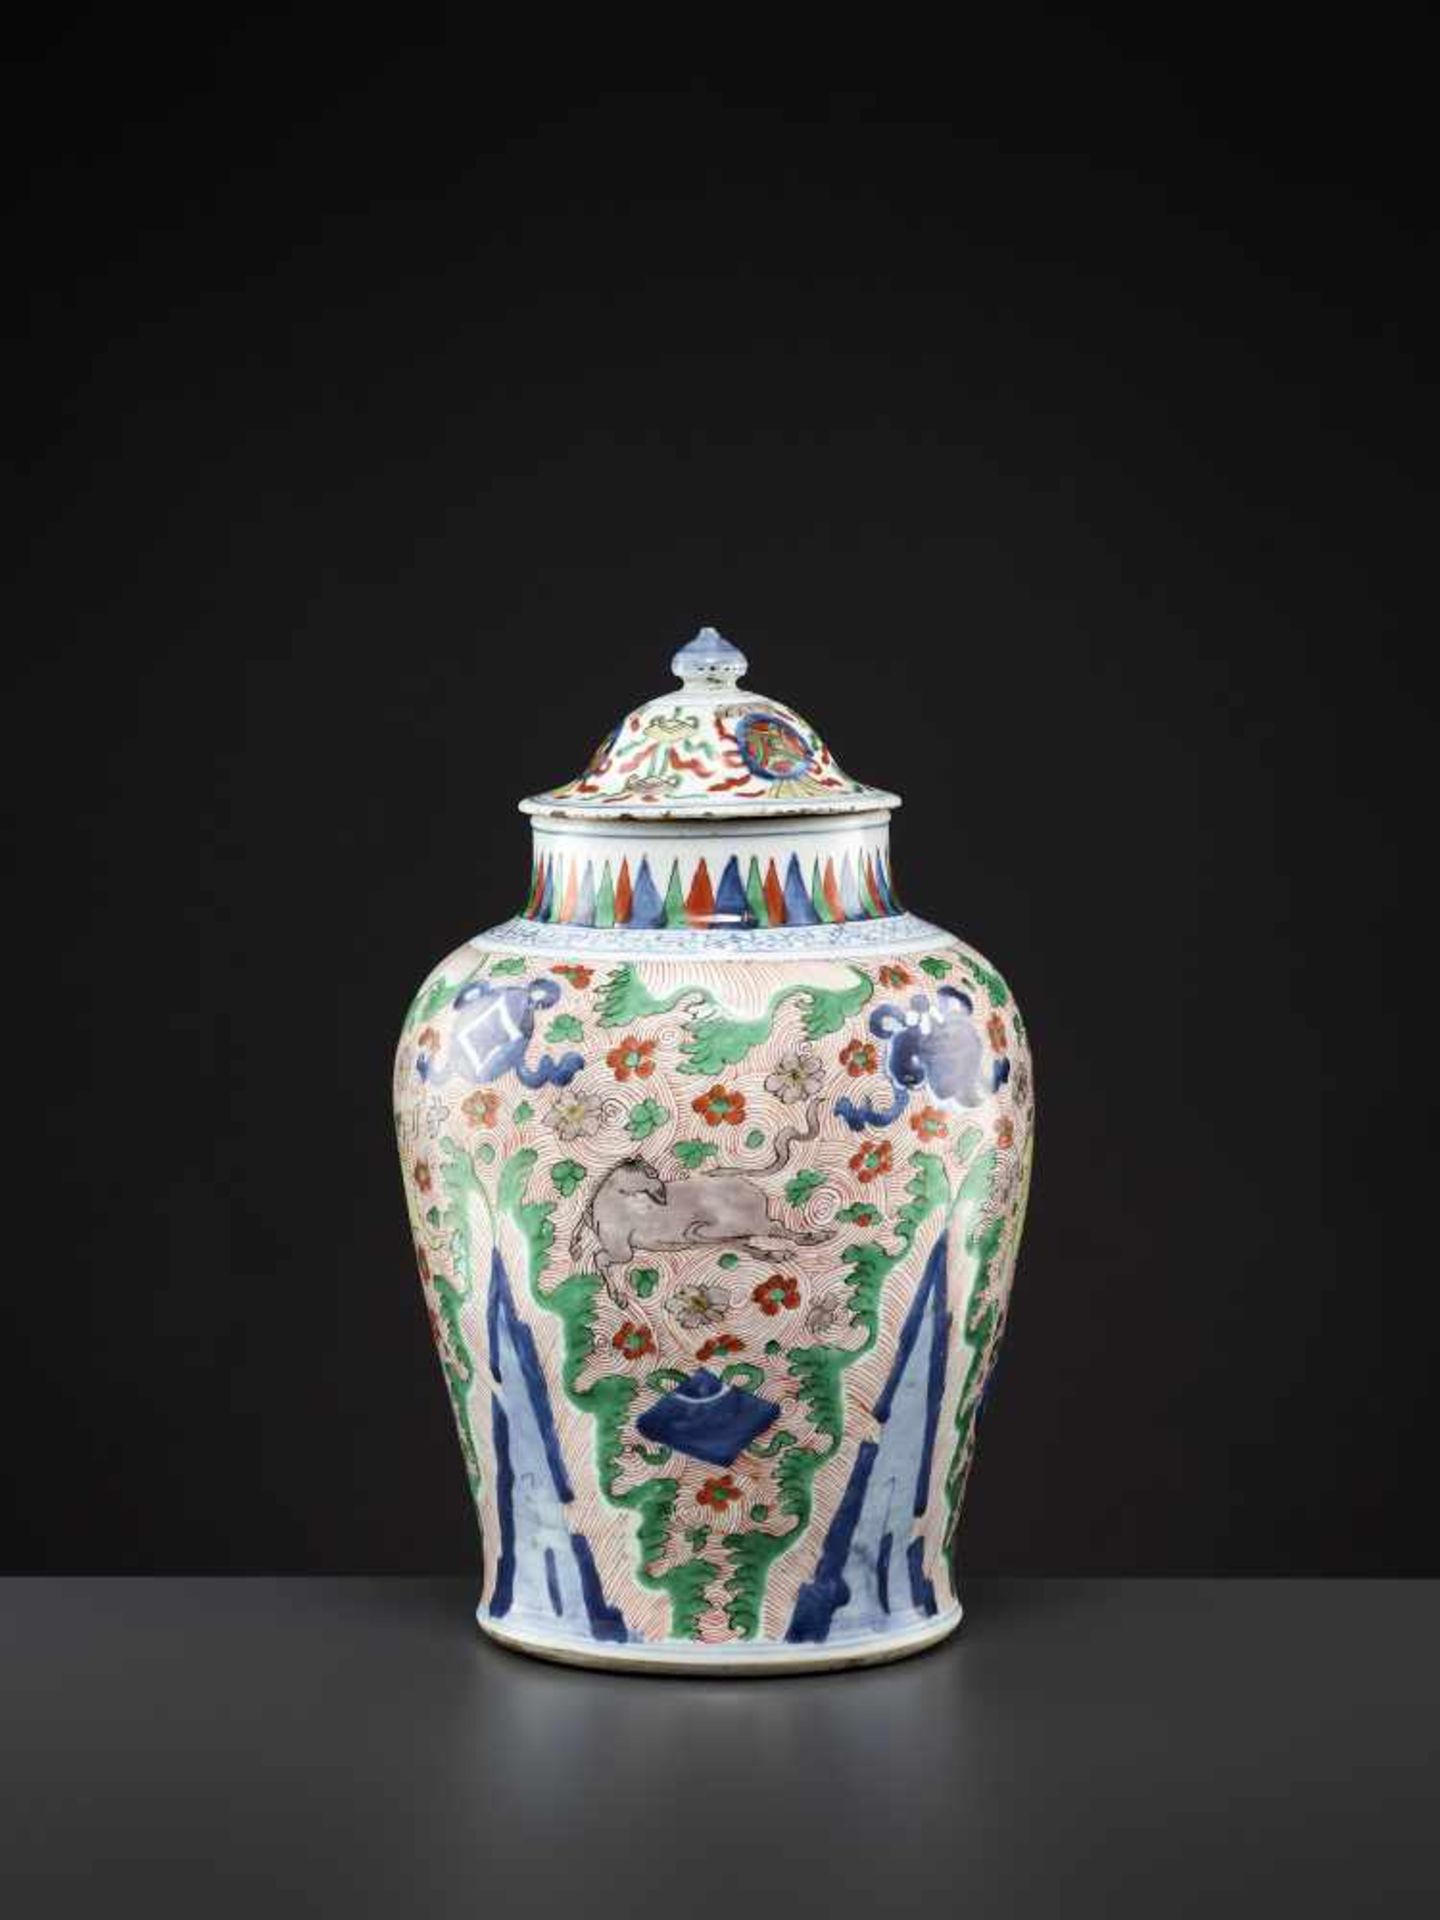 A LIDDED WUCAI VASE, MING DYNASTY China, 16th - 17th century. Freely painted in underglaze blue, - Image 5 of 9